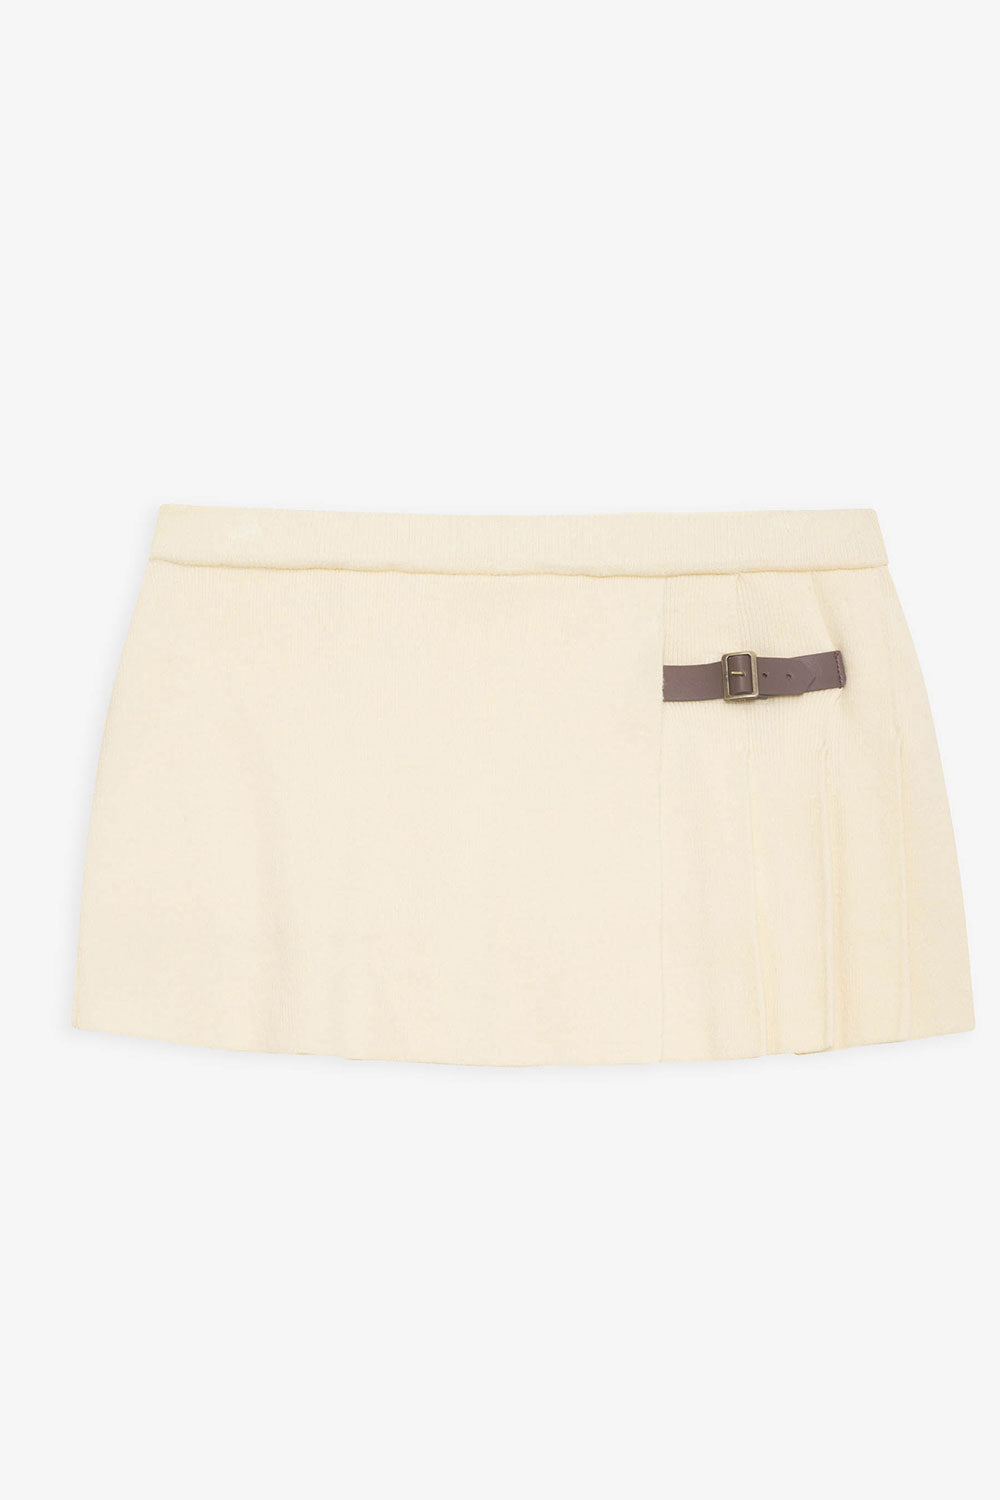 Carver Cloud Knit Pleated Skort - French Vanilla